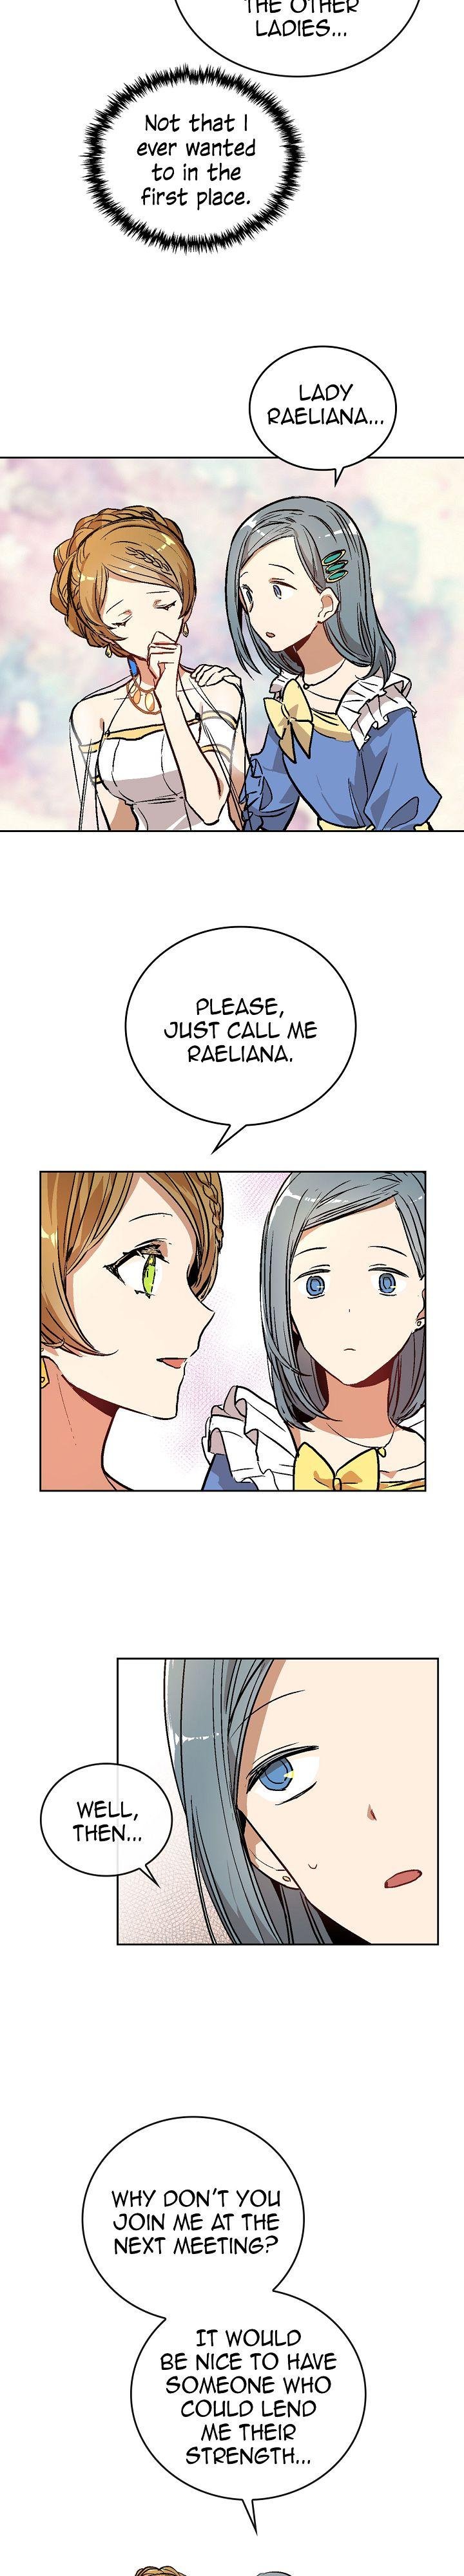 The Reason Why Raeliana Ended up at the Duke’s Mansion Chapter 18 - Page 3